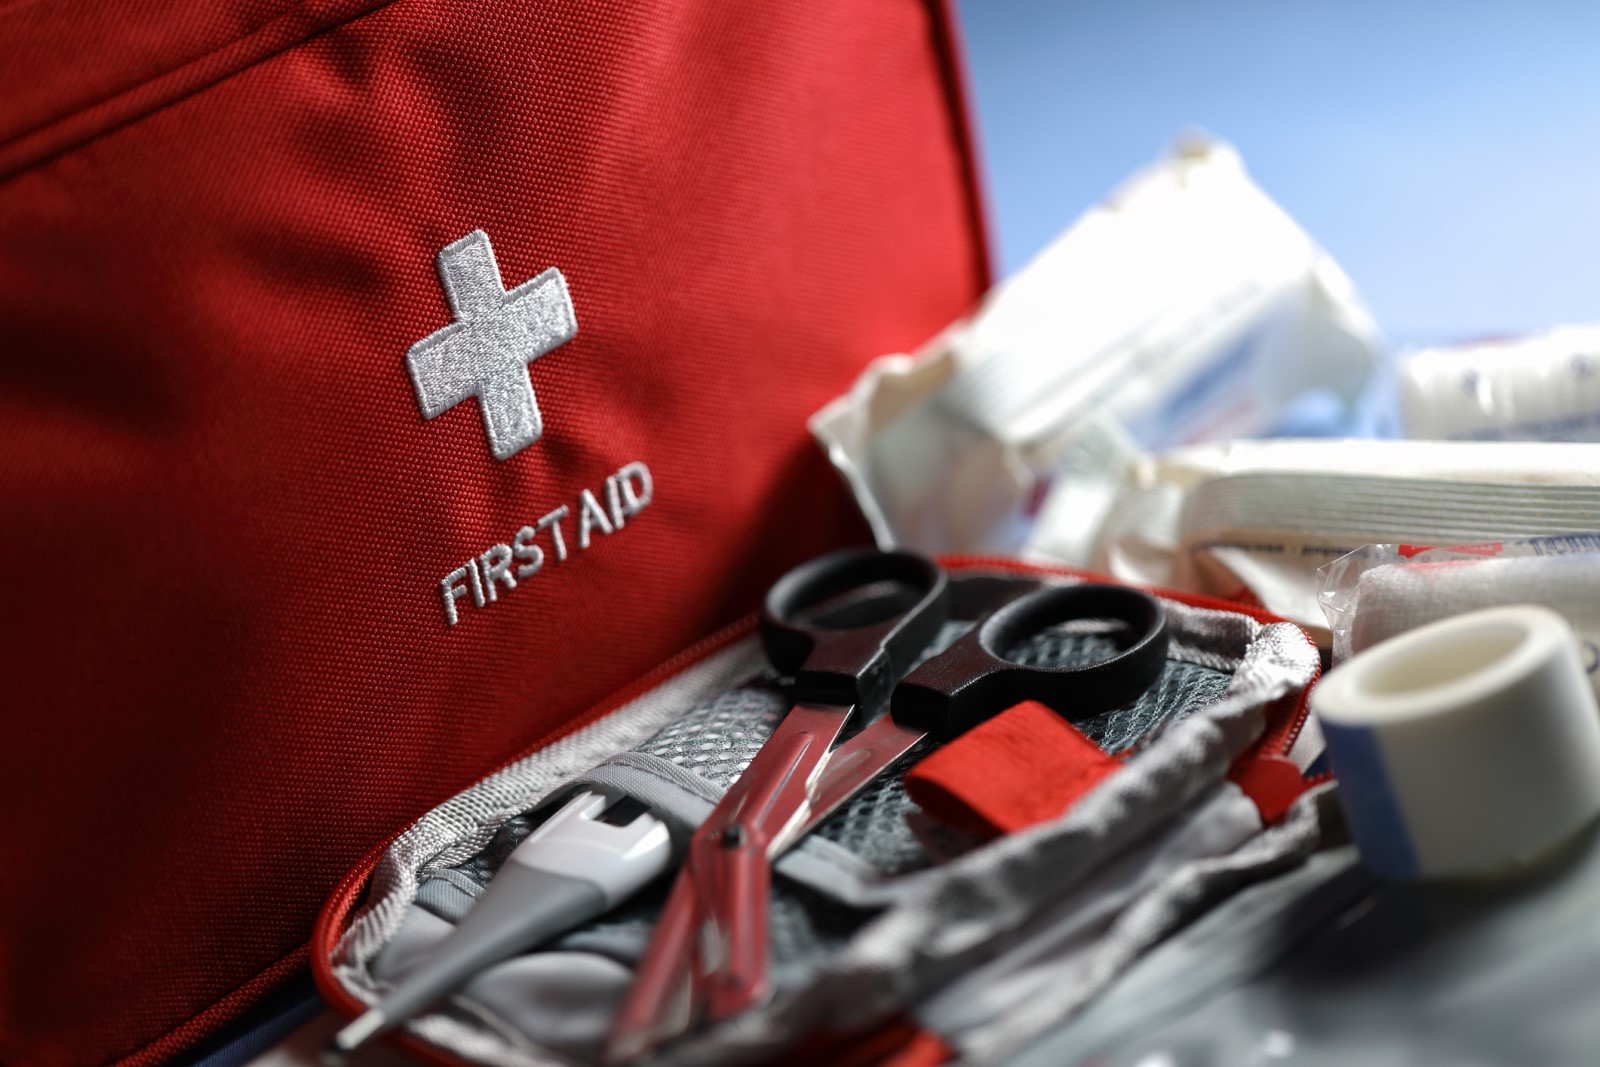 Provide First Aid Course